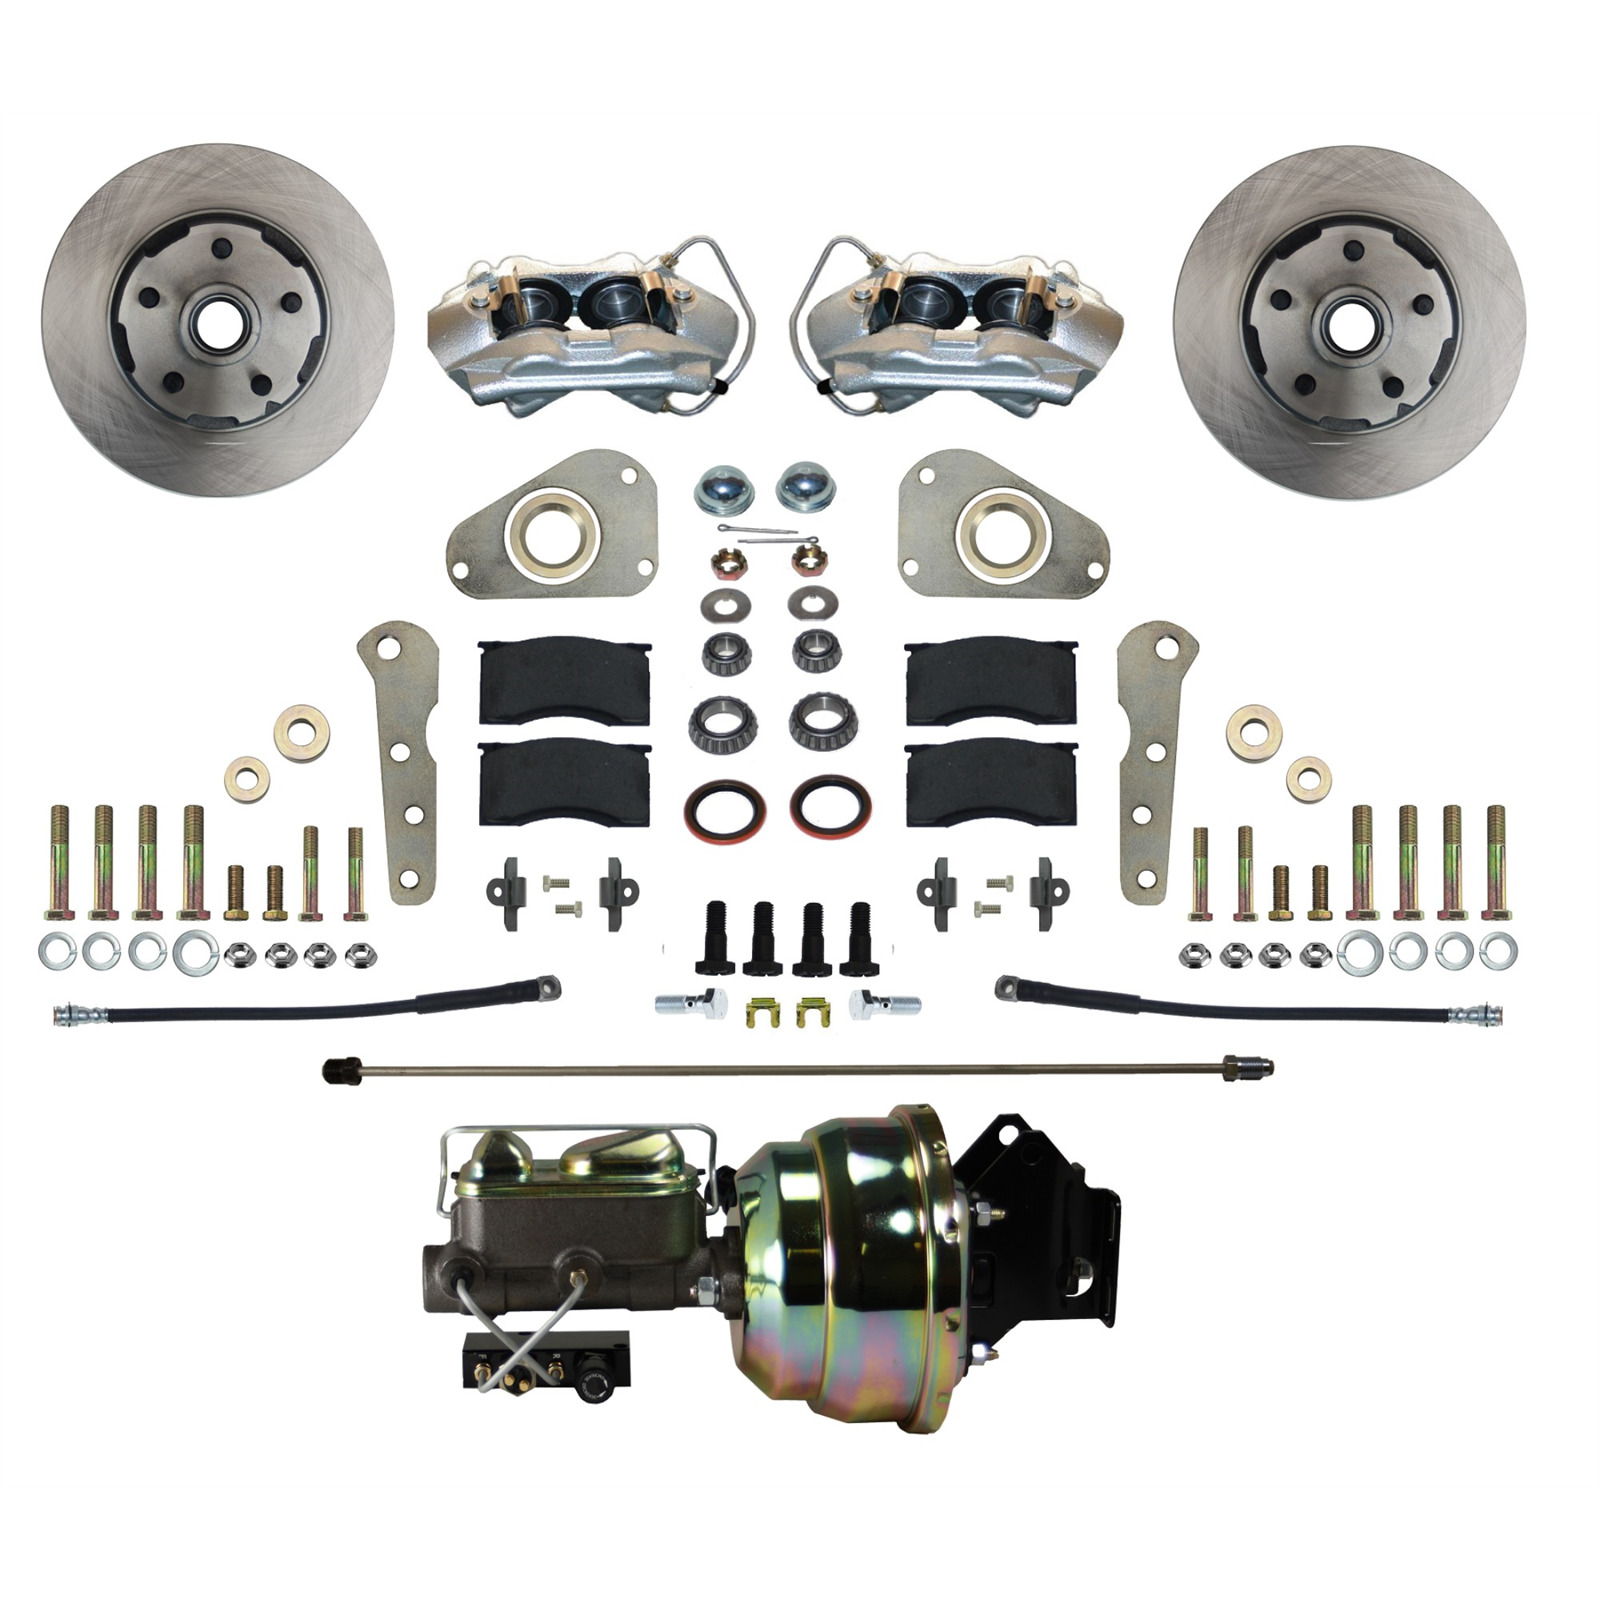 Ford Galaxie Power Front Disc Brake Conversion Kit for Factory manual brake car